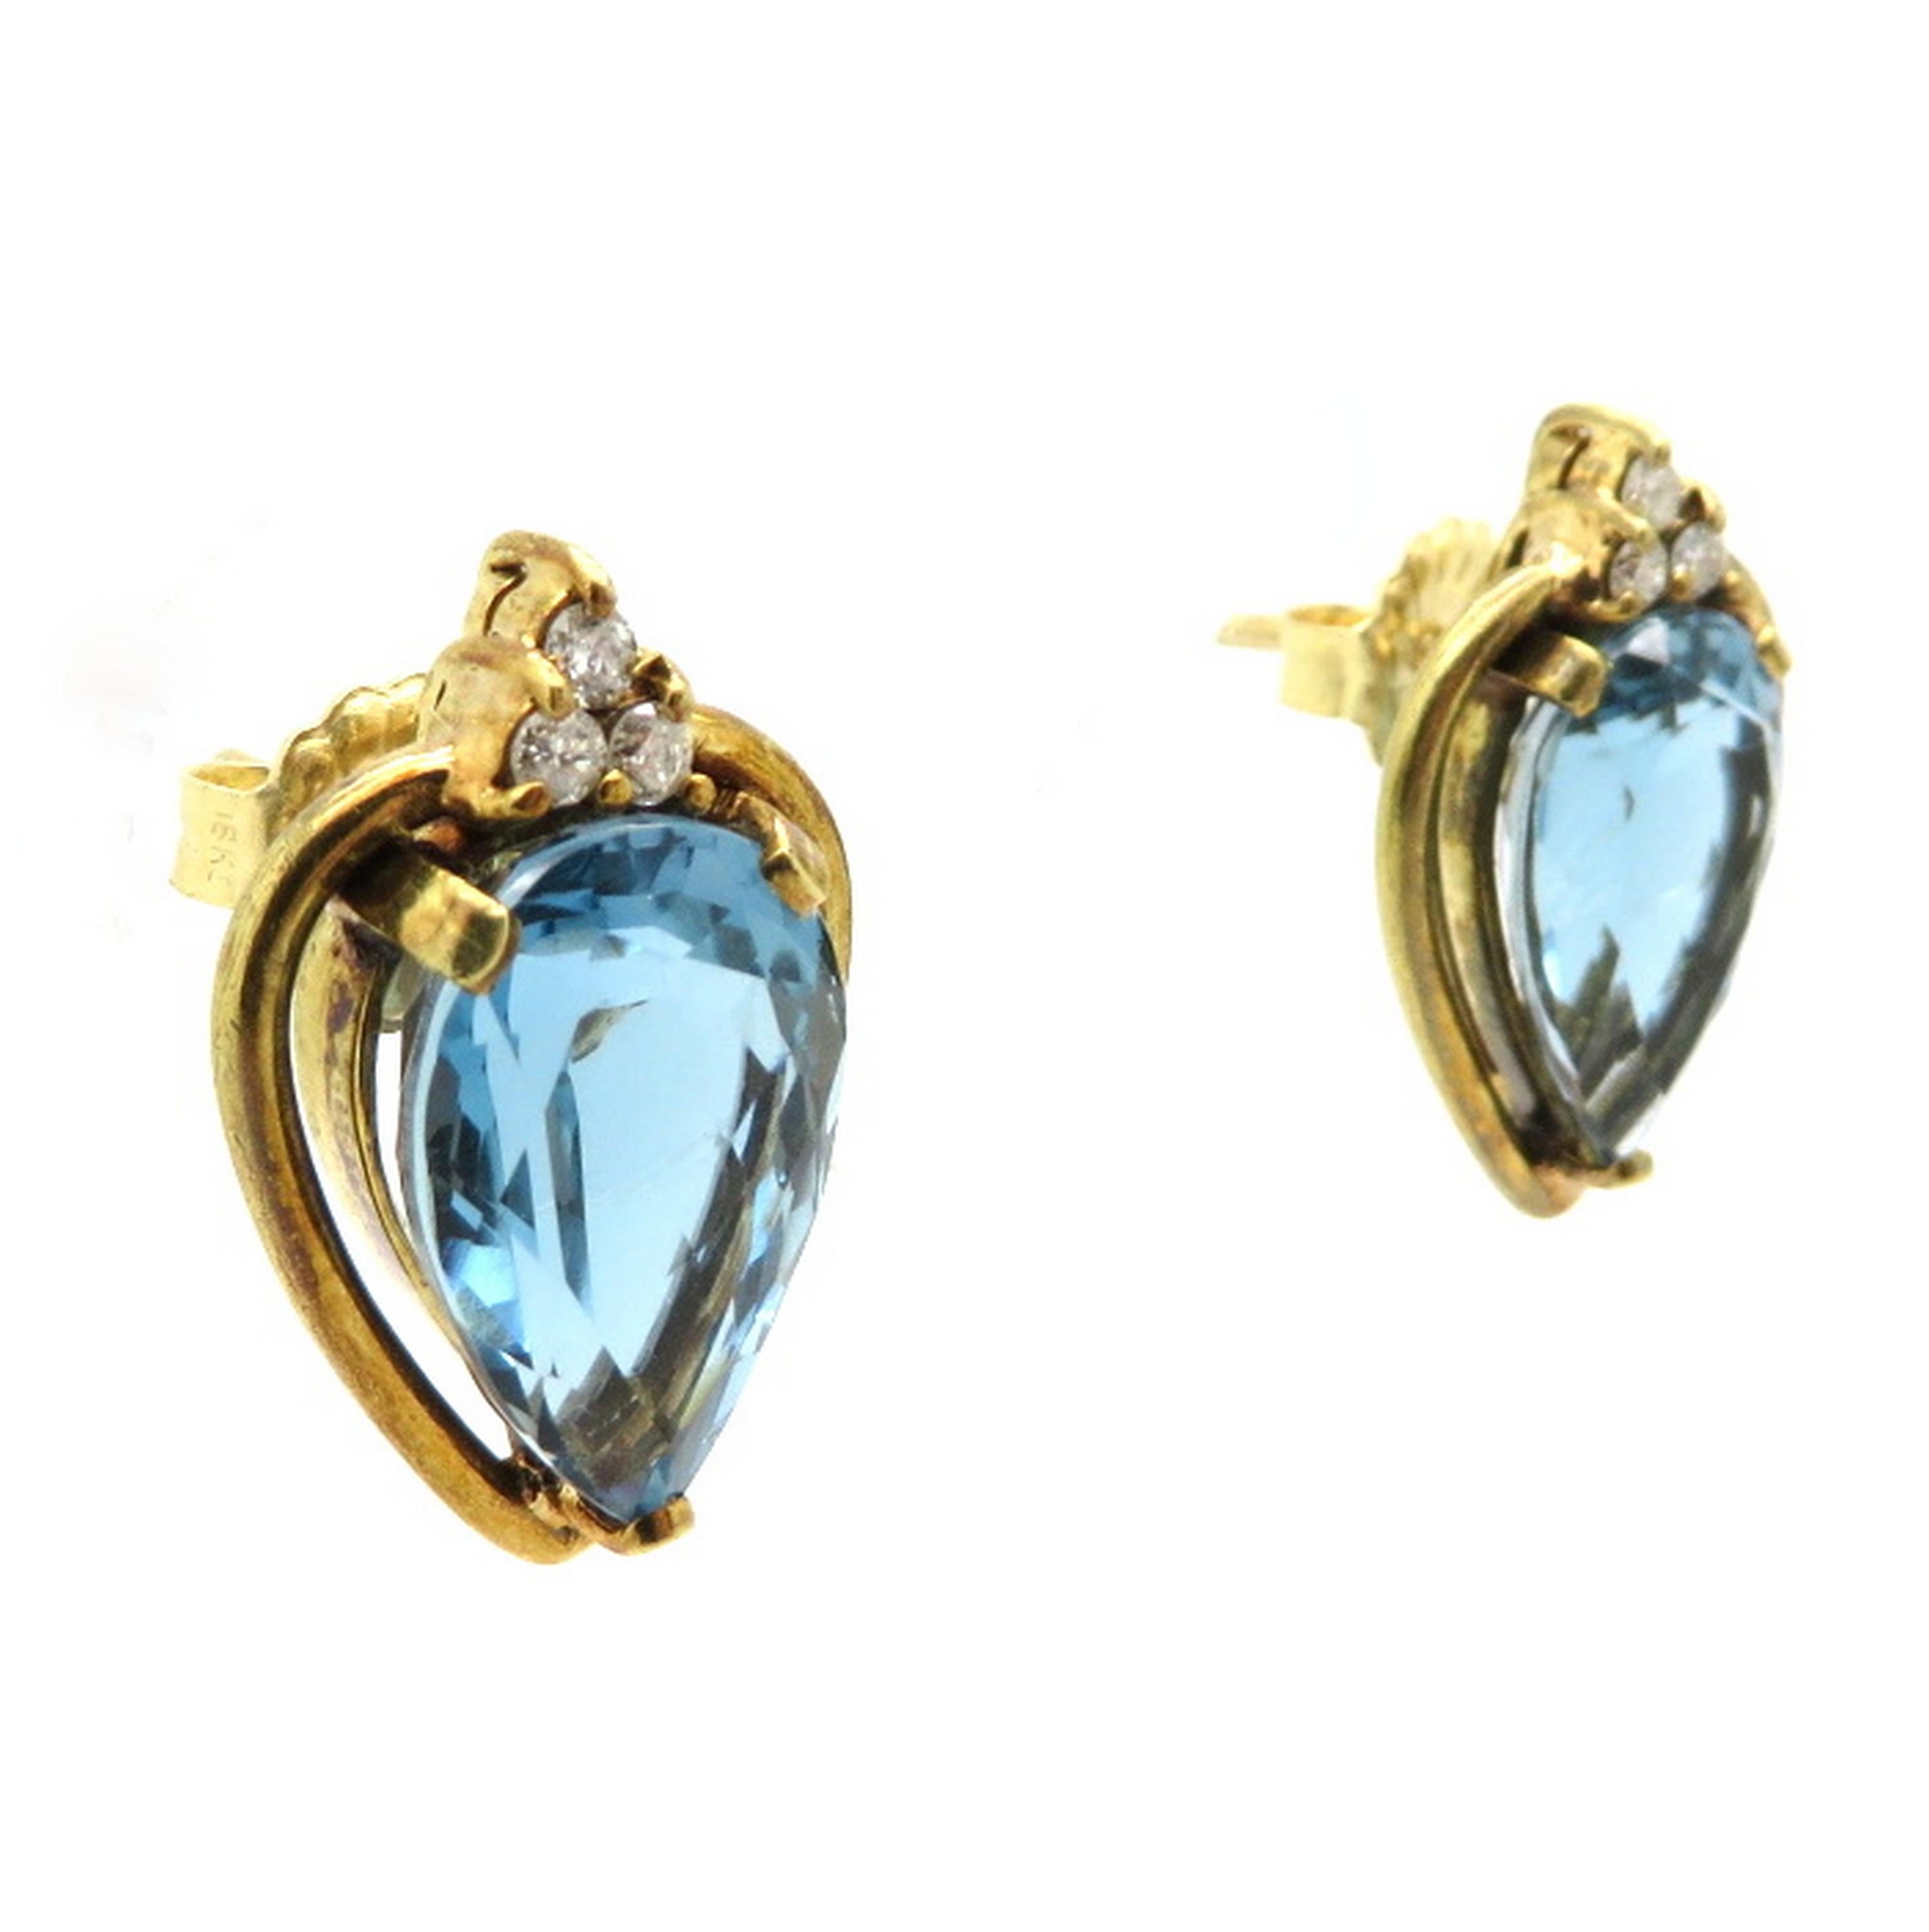 Estate 18K yellow gold 8.00 carat pear shaped blue topaz and diamond fashion earrings. Showcasing two fine quality pear shaped blue topaz gemstones, each three prong set, weighing a total of 8.00 carats. Accented with six prong set round brilliant